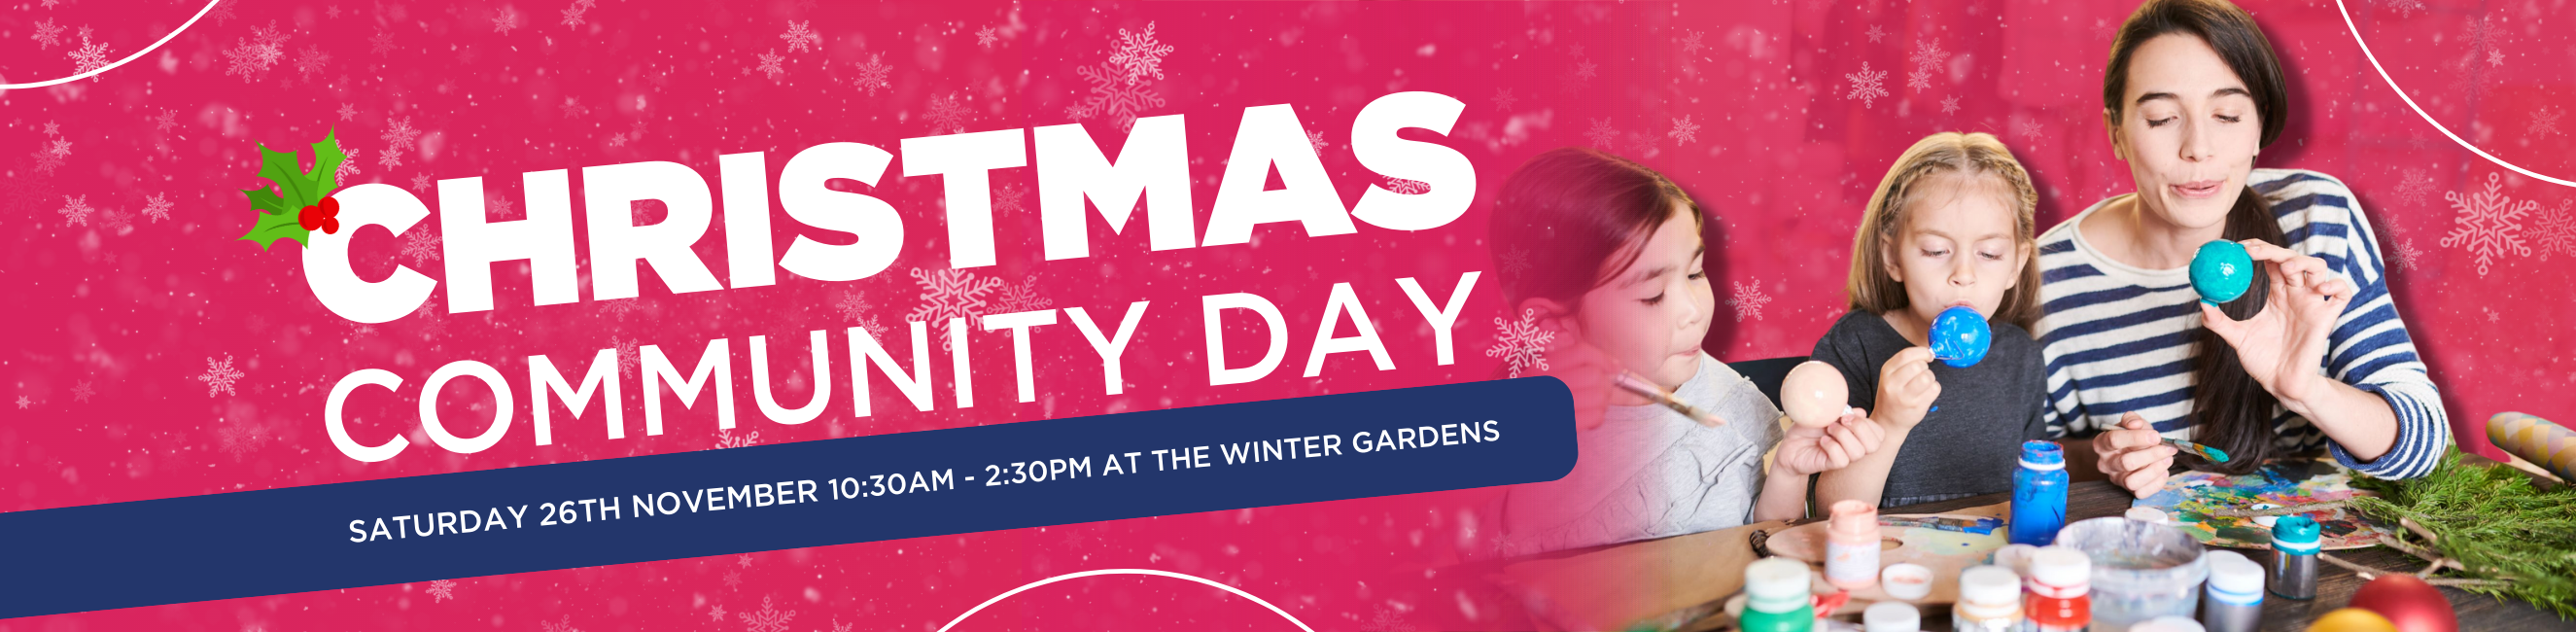 Christmas Community Day at the Winter Gardens on Saturday 26th November between 10:30am to 2:30pm